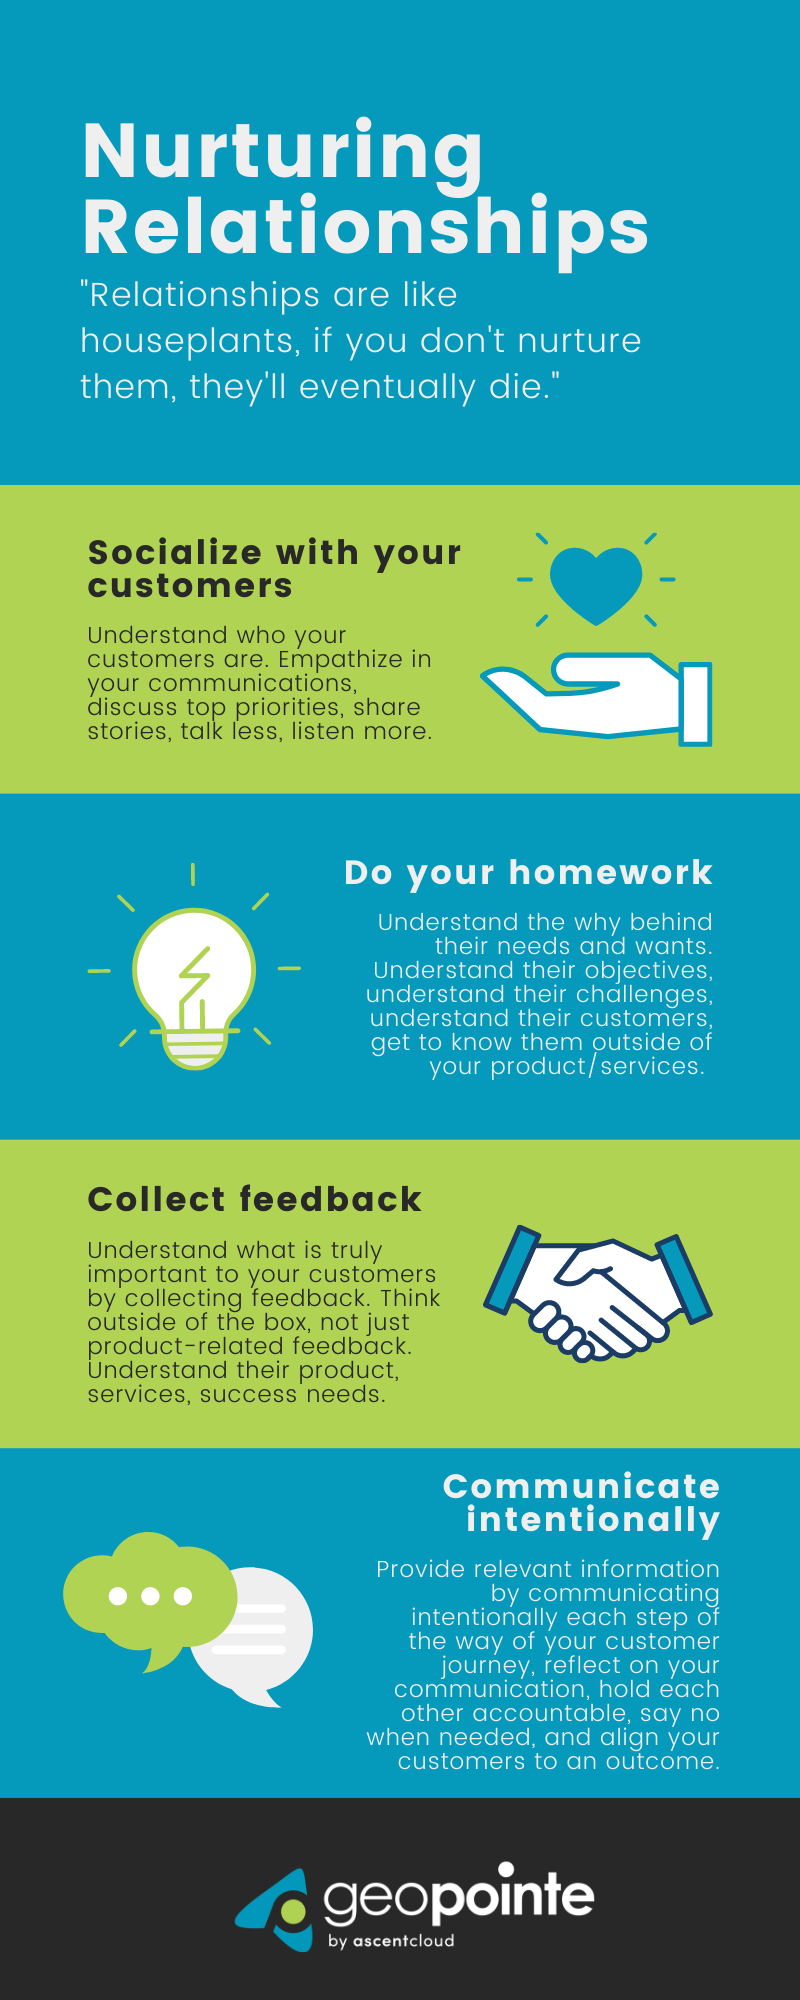 Customer Success - How to Nurture Customer Relationships infographic